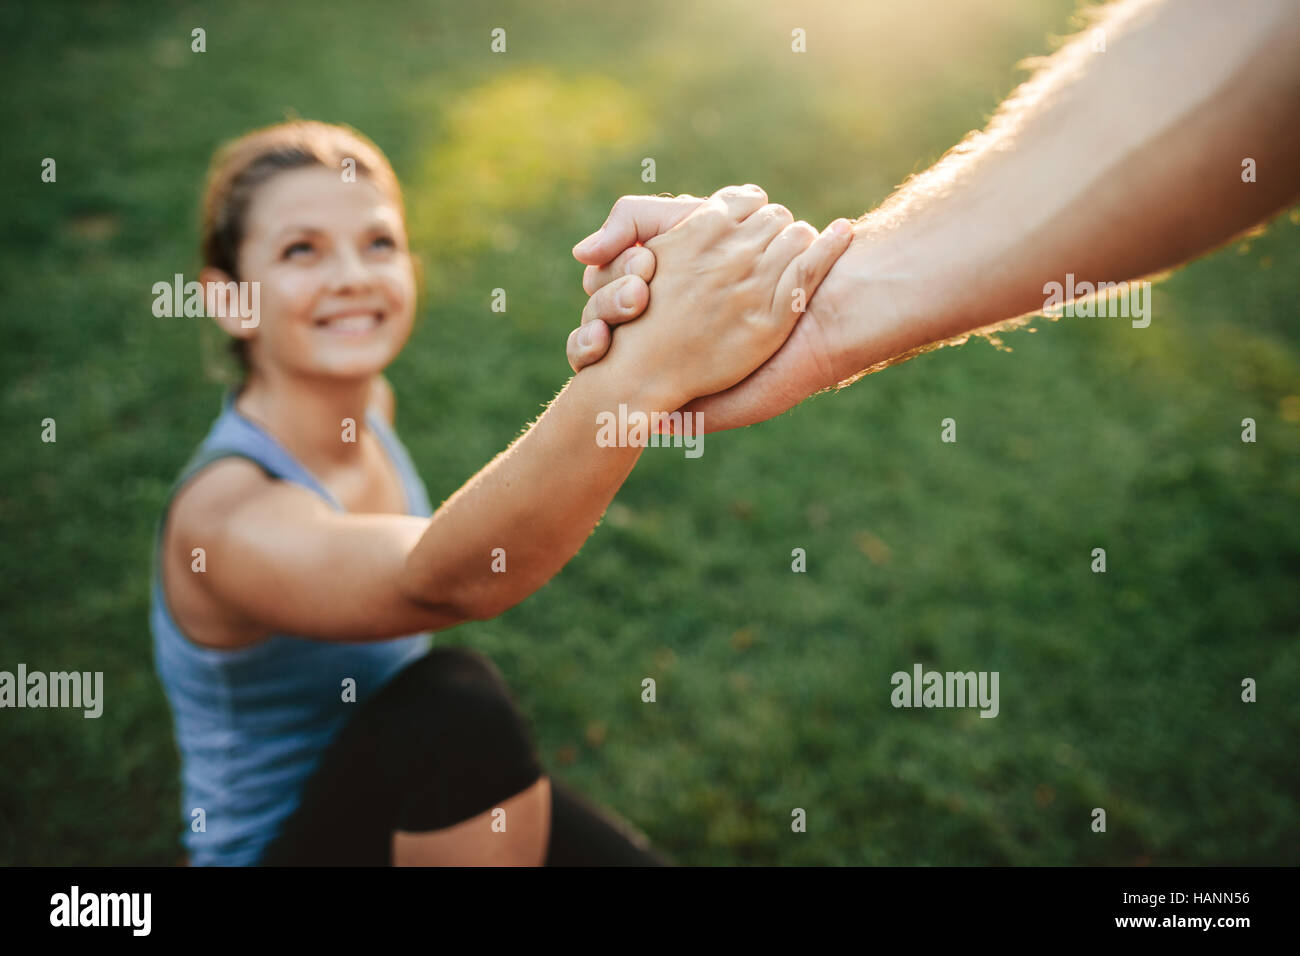 Close up shot of man helping woman to stand up. Focus on hands of couple exercising at park. Stock Photo